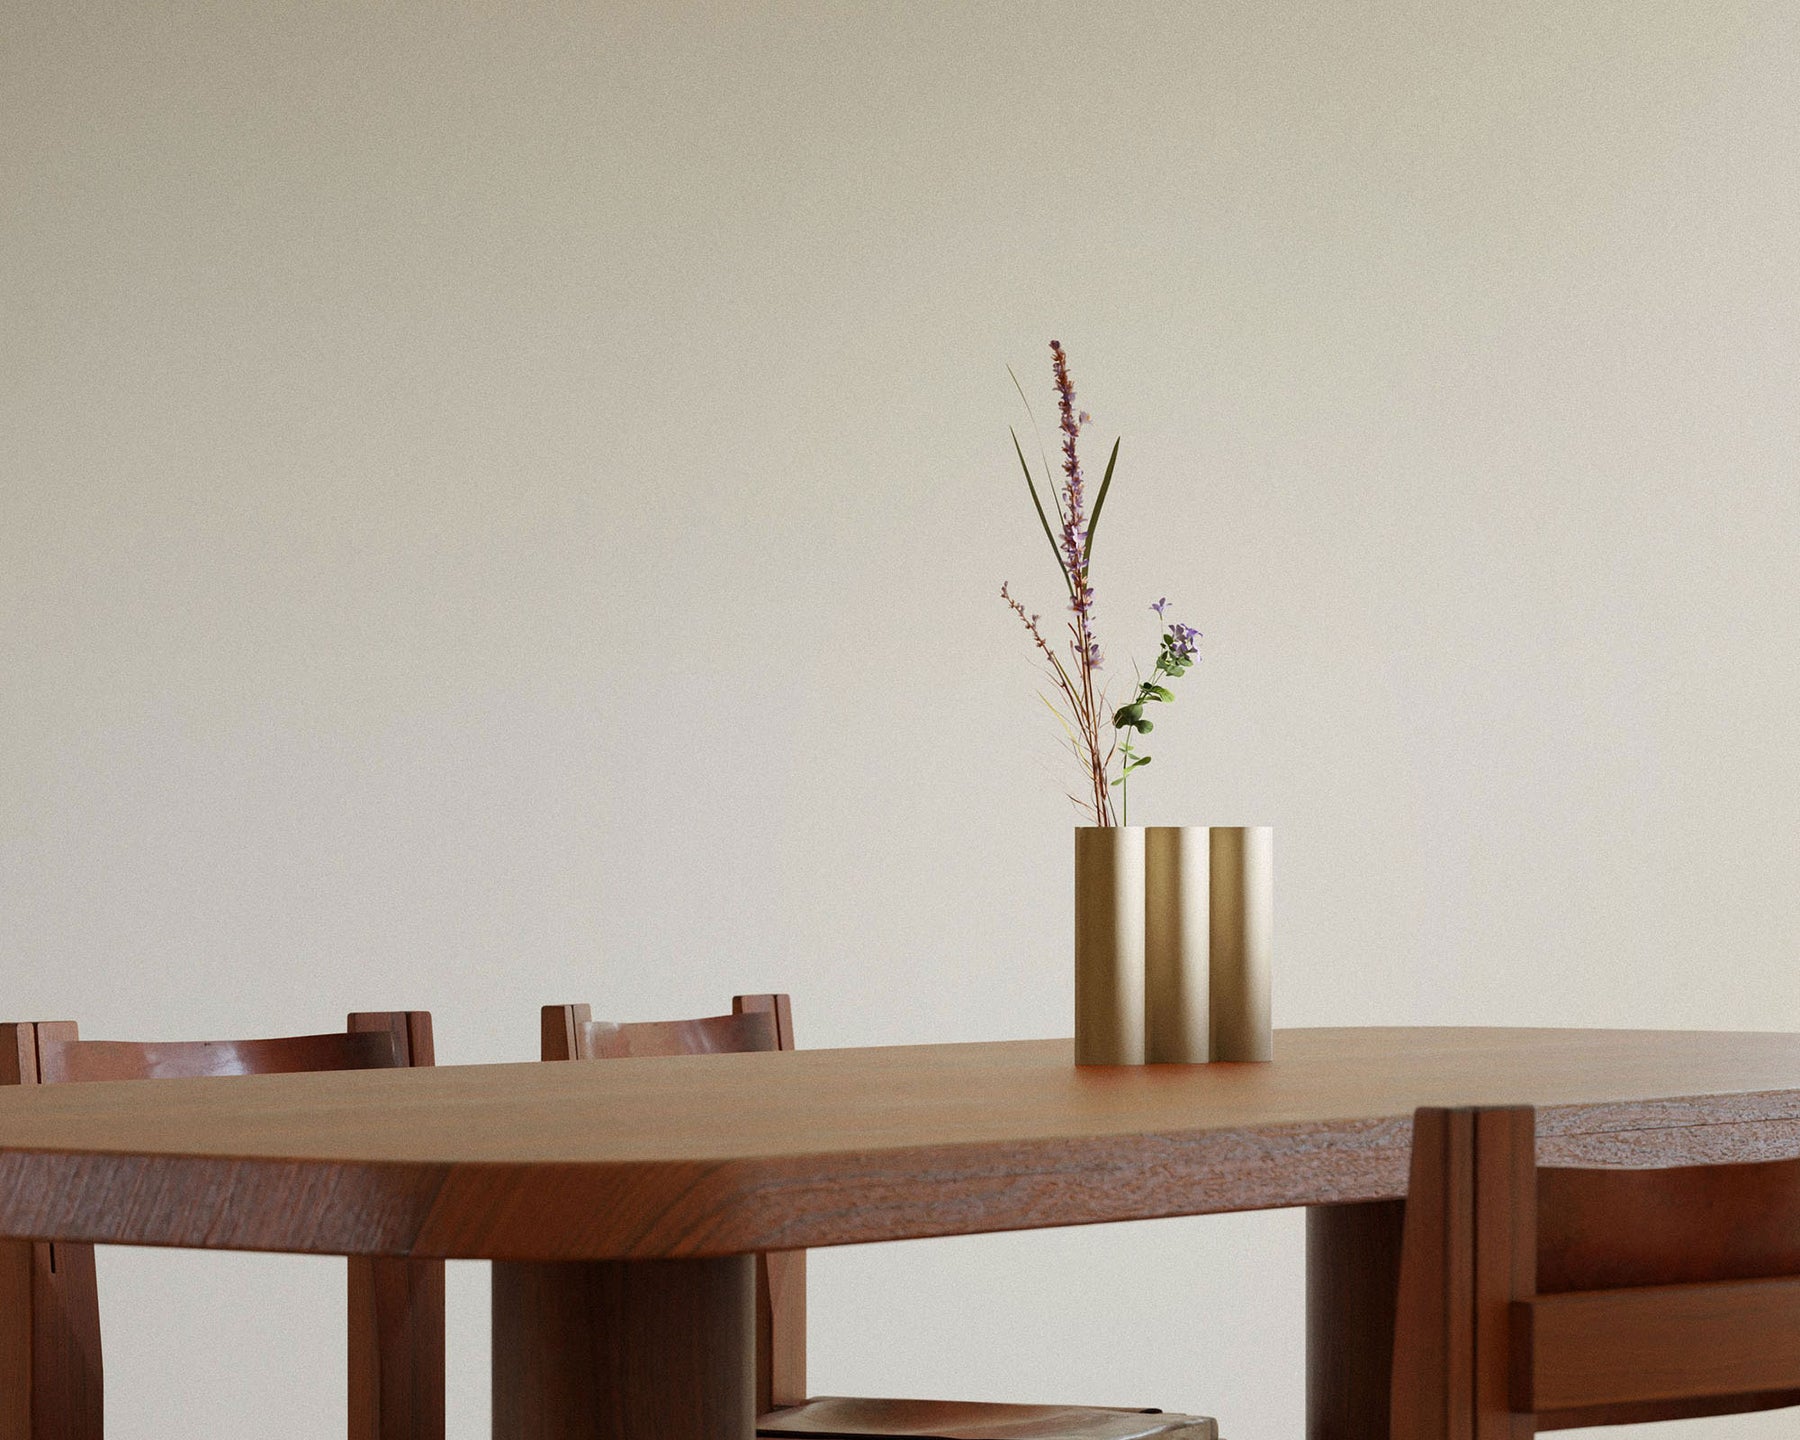 Modern Dining Room Accessories | DSHOP